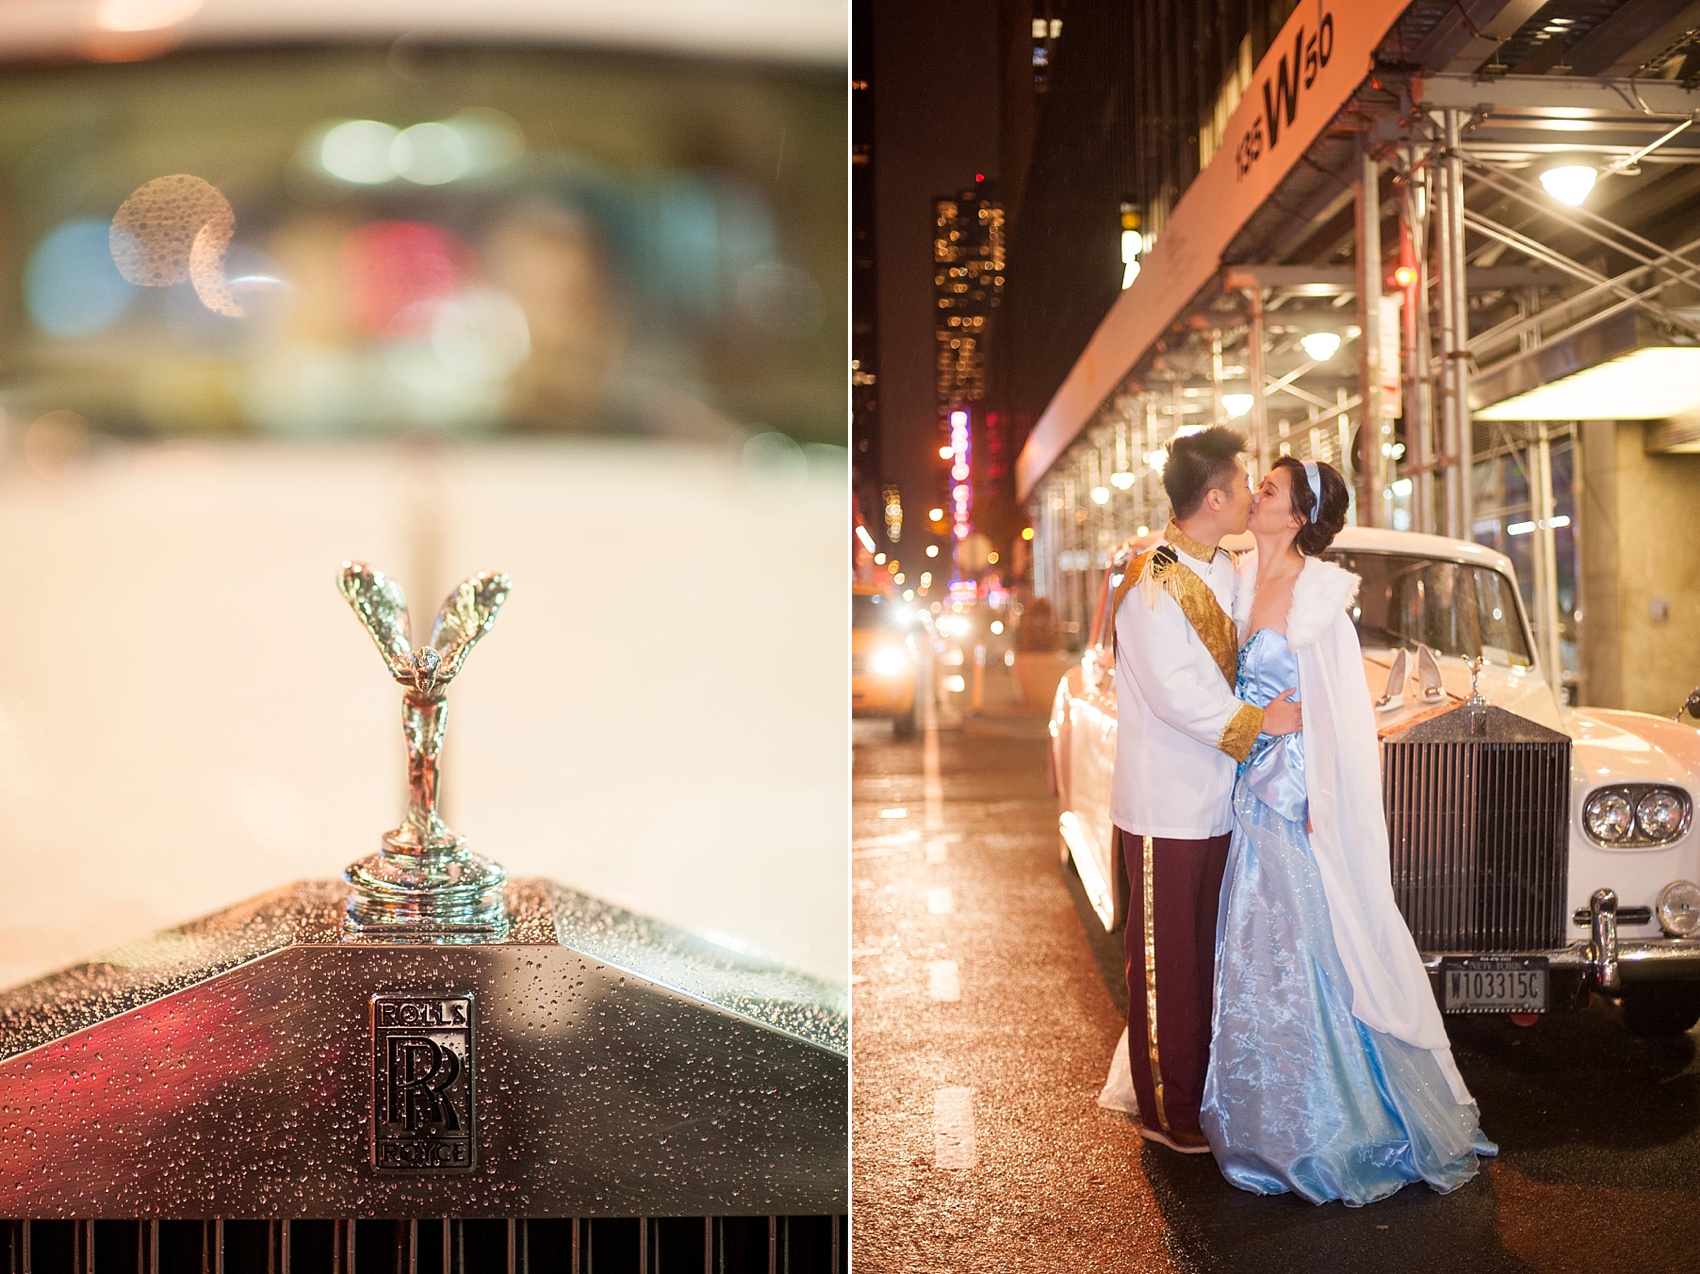 Classic Rolls Royce for a Disney Cinderella proposal at Le Bernadin captured by Mikkel Paige, New York City wedding photographer. Coordination by Brilliant Event Planning.